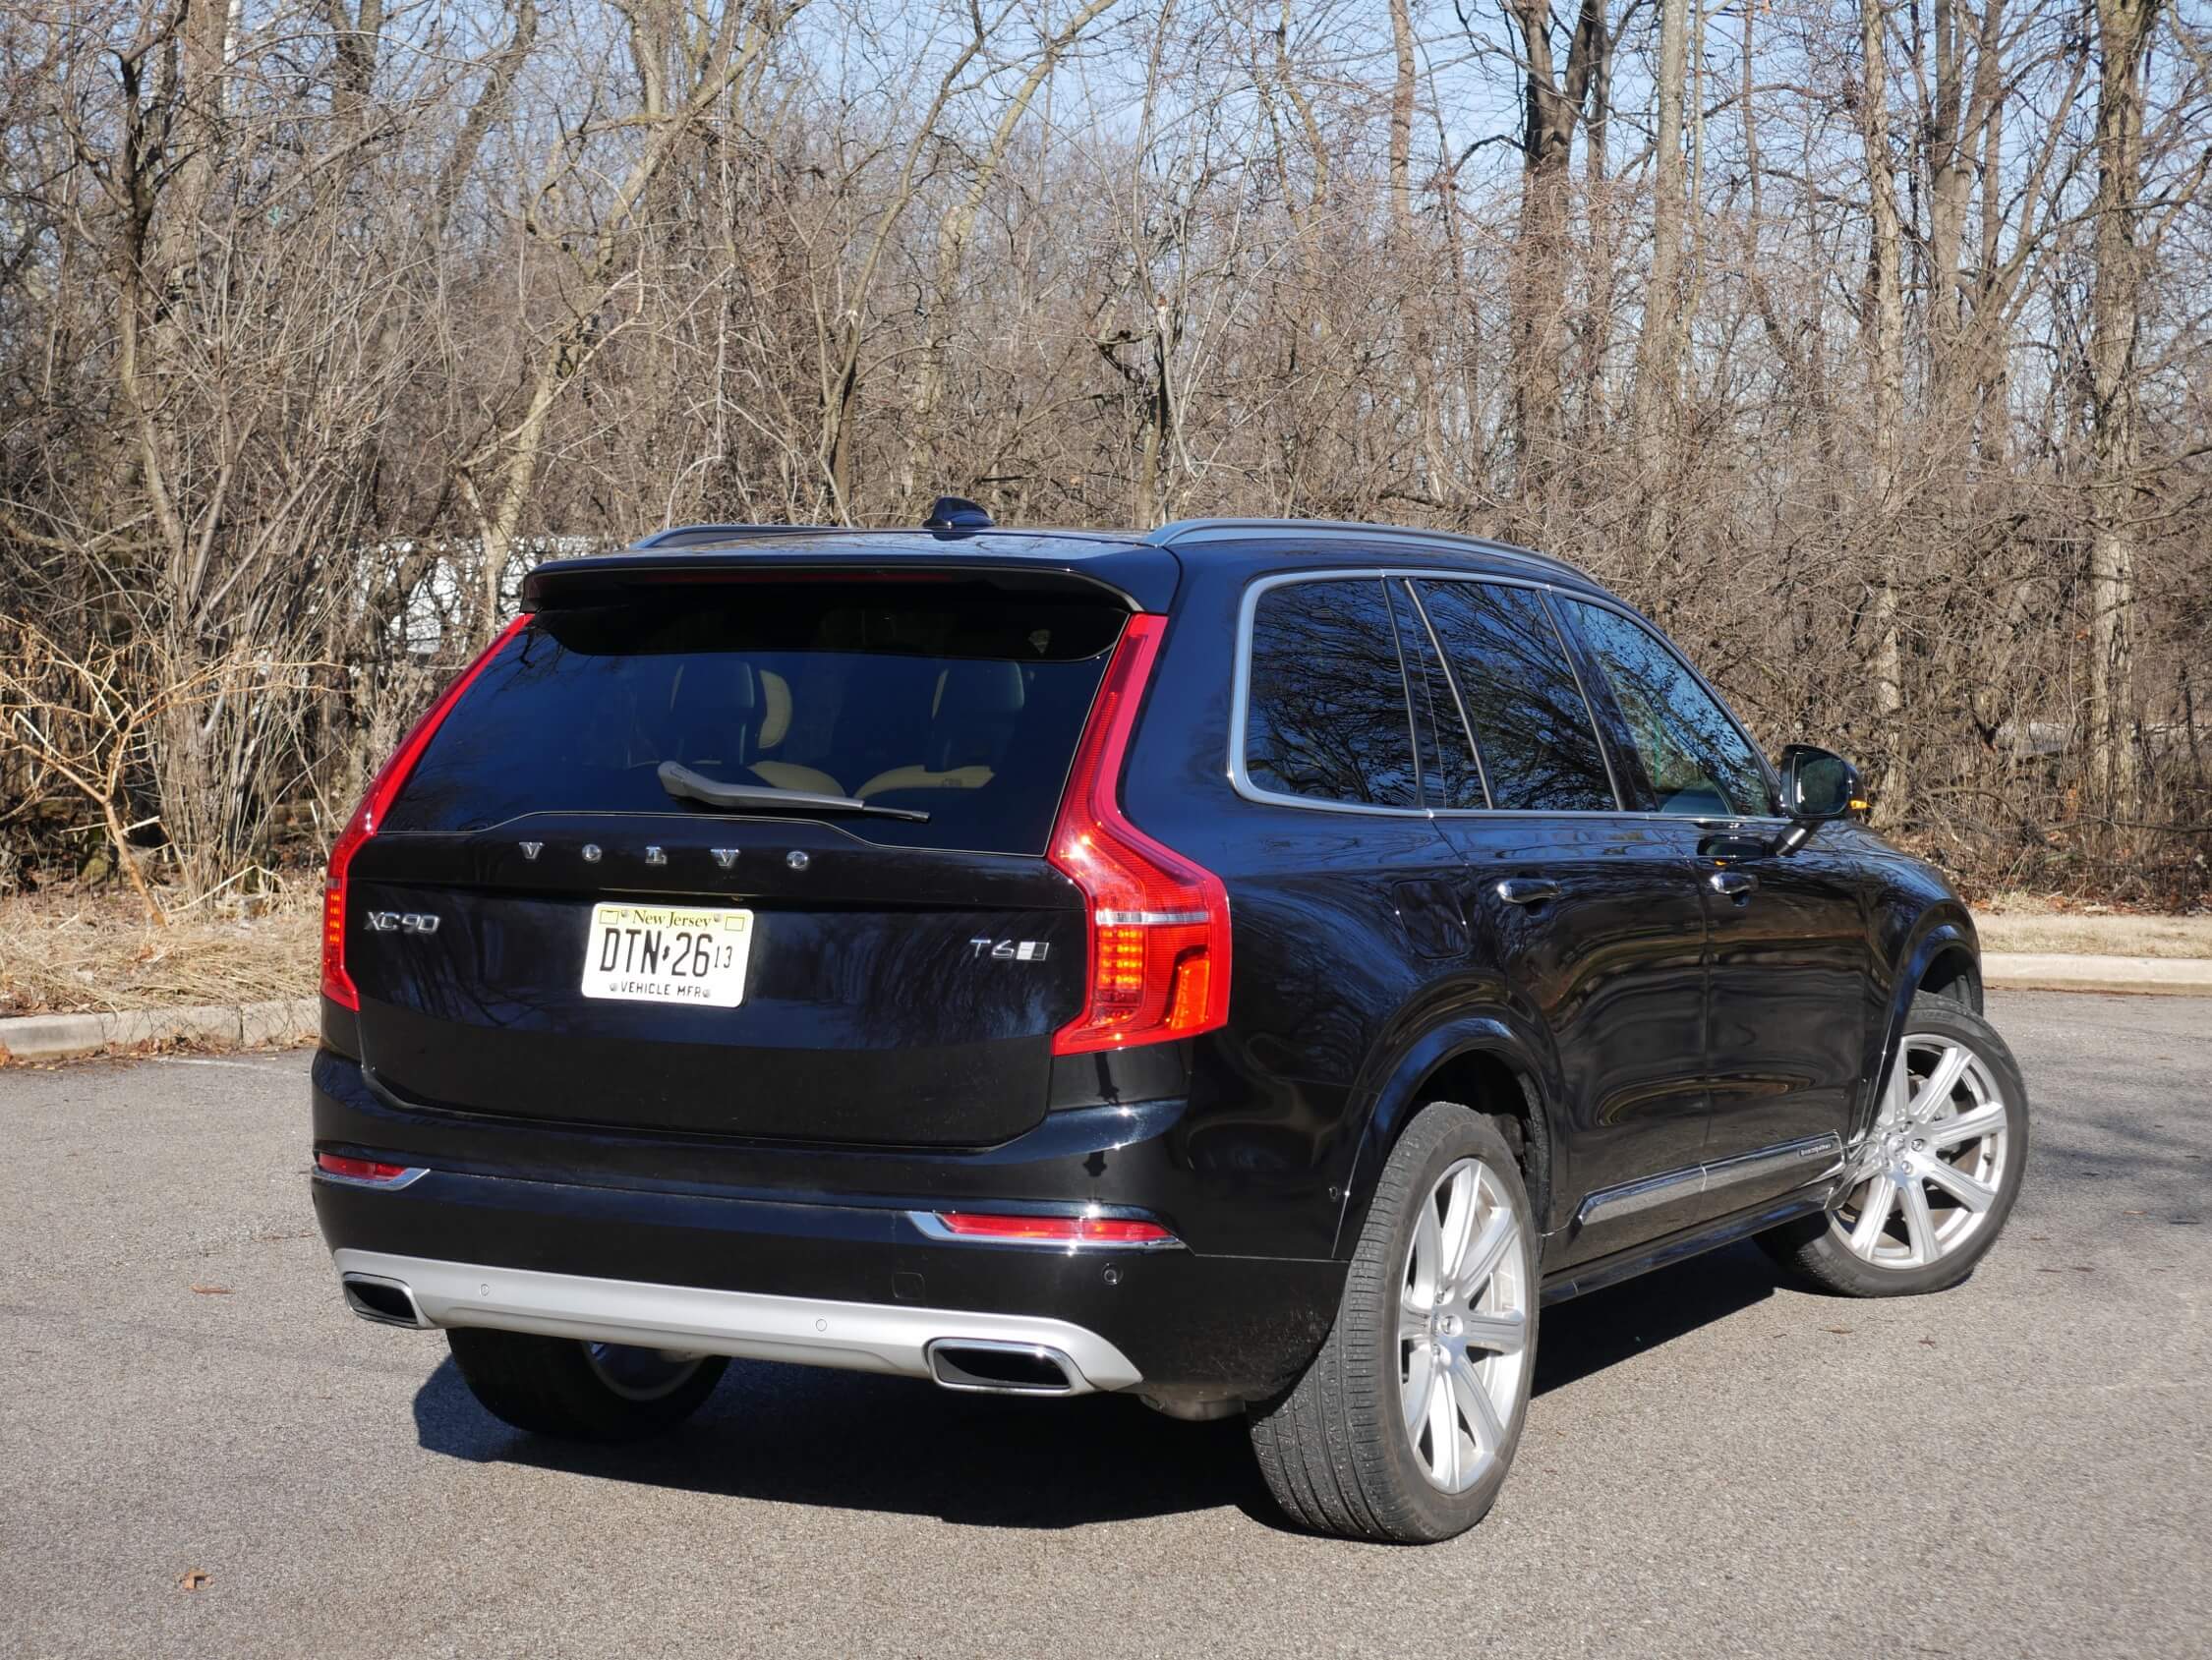 2017 XC90 T6 AWD Inscription: Boomerang taillamps rise vertically from just above bumper to roof spoiler.